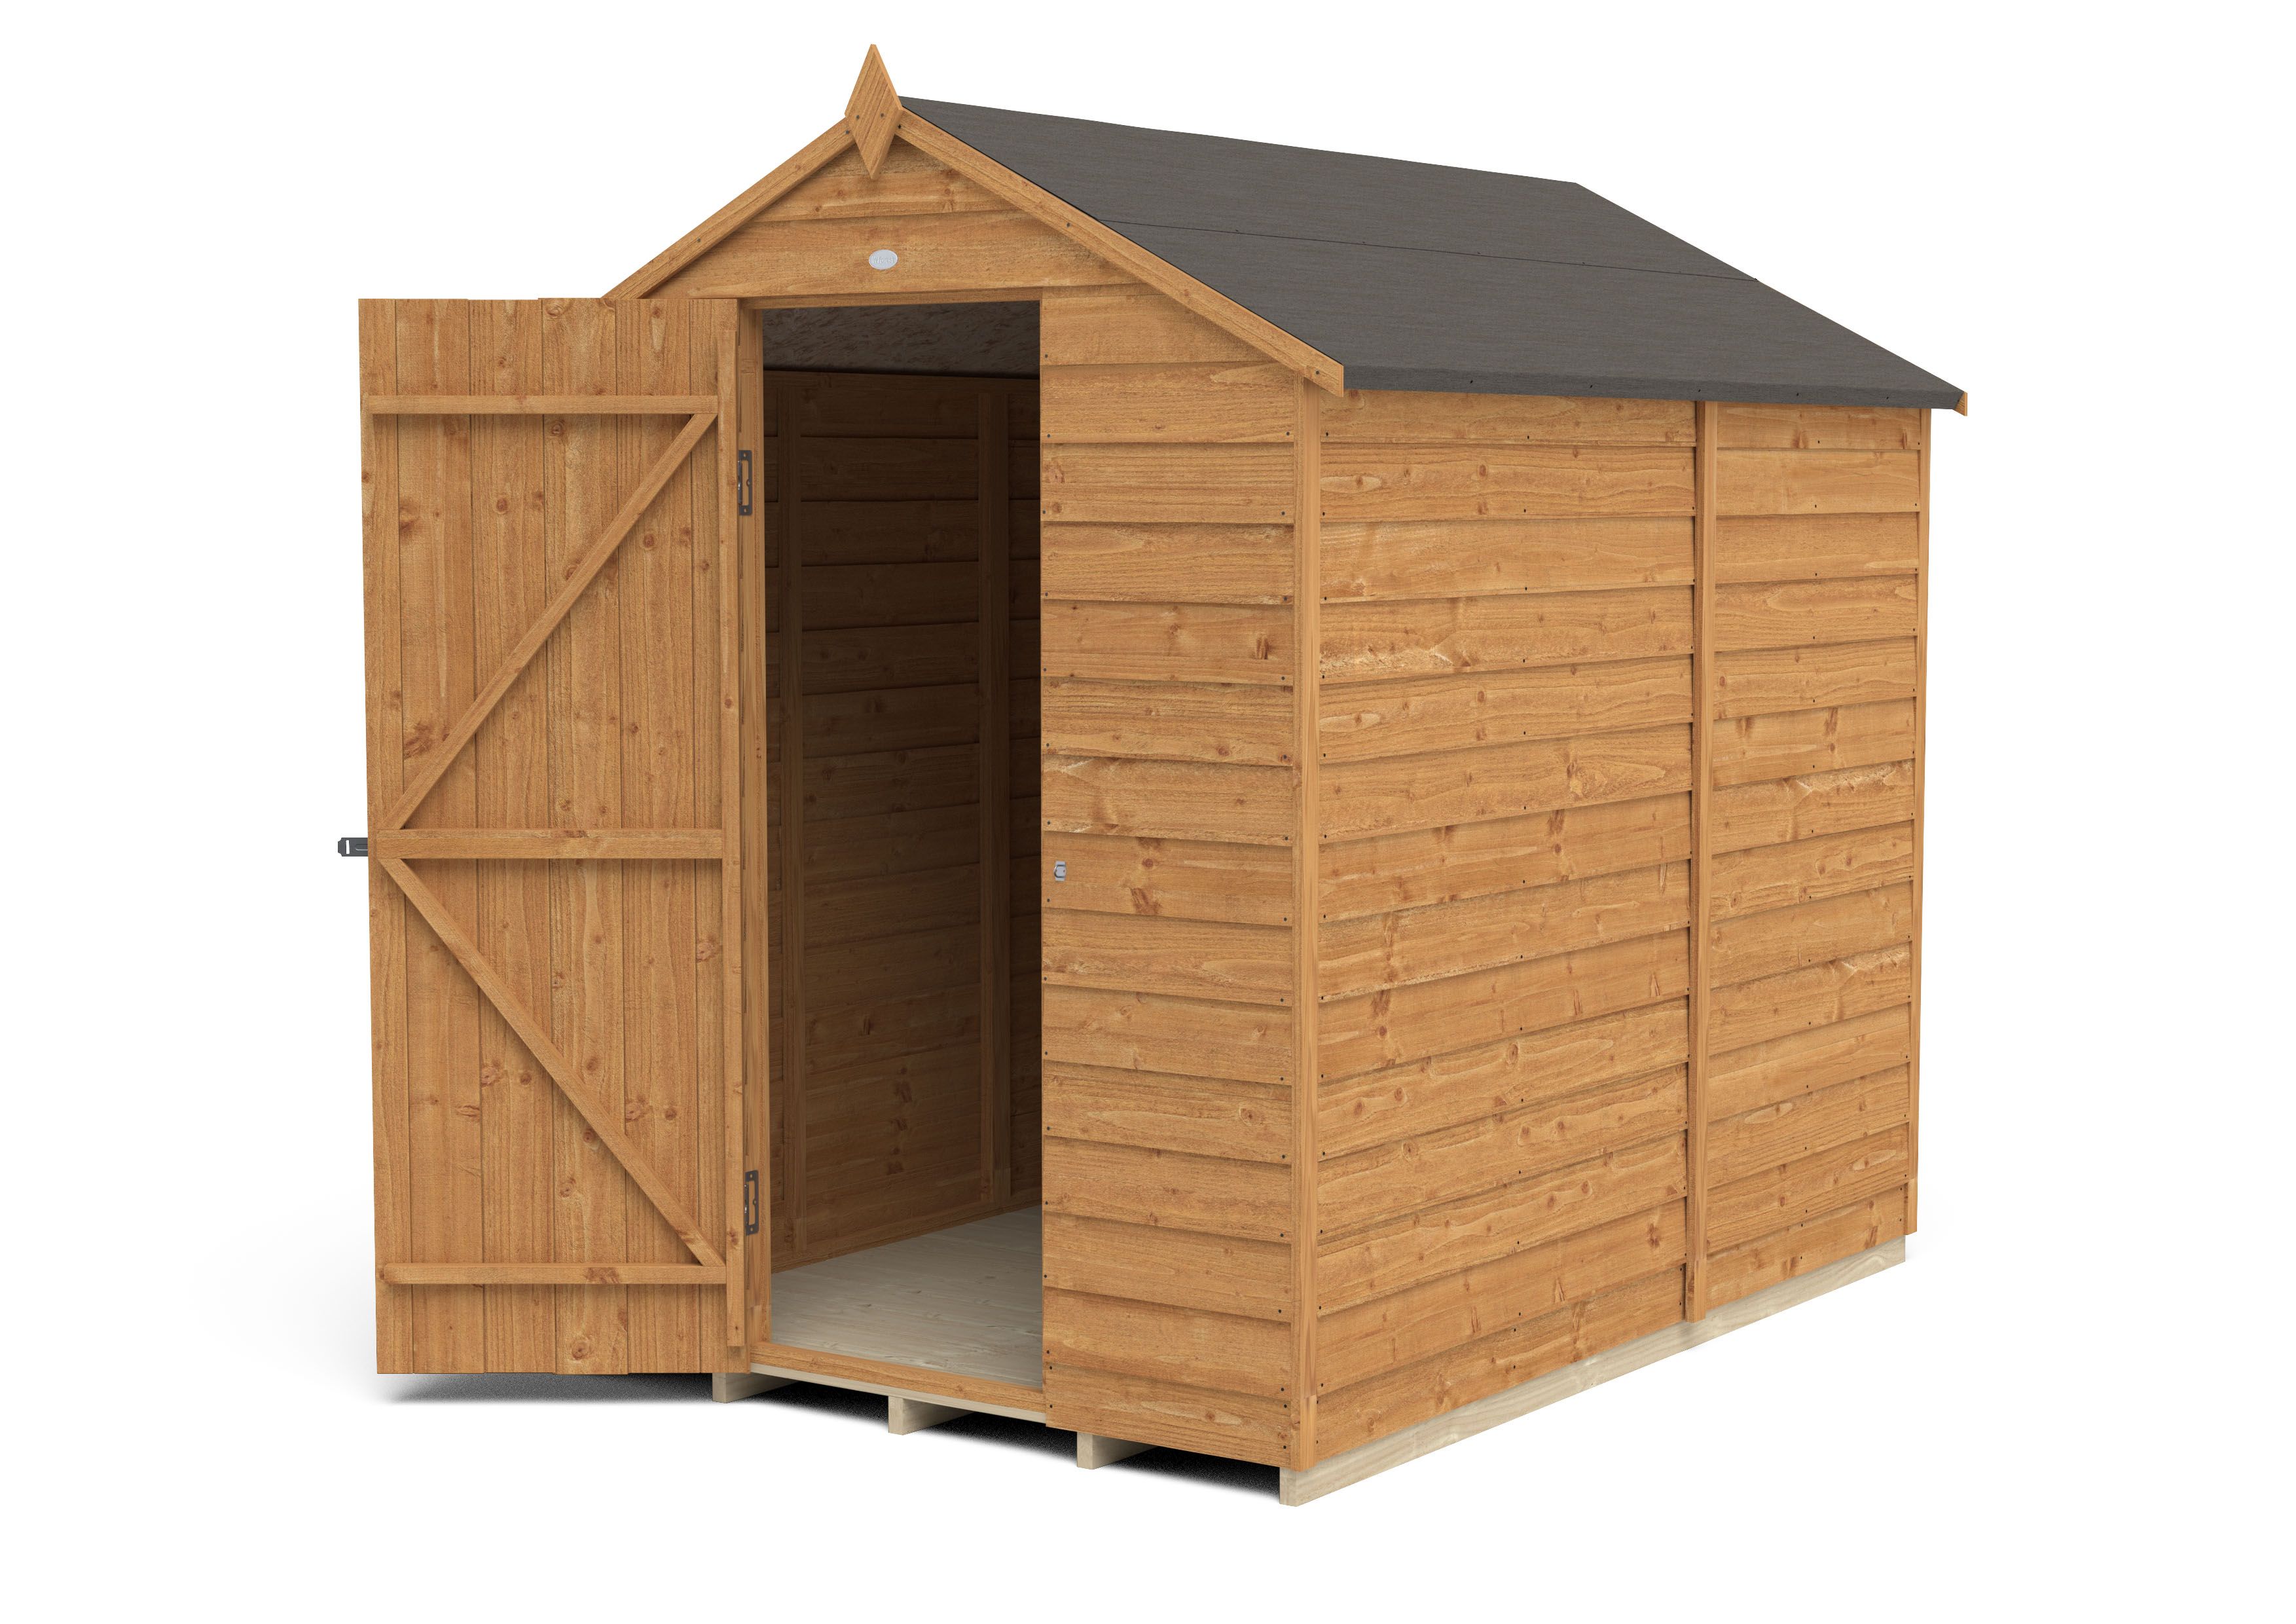 Forest Garden Overlap 7x5 ft Apex Wooden Dip treated Shed with floor (Base included) - Assembly service included